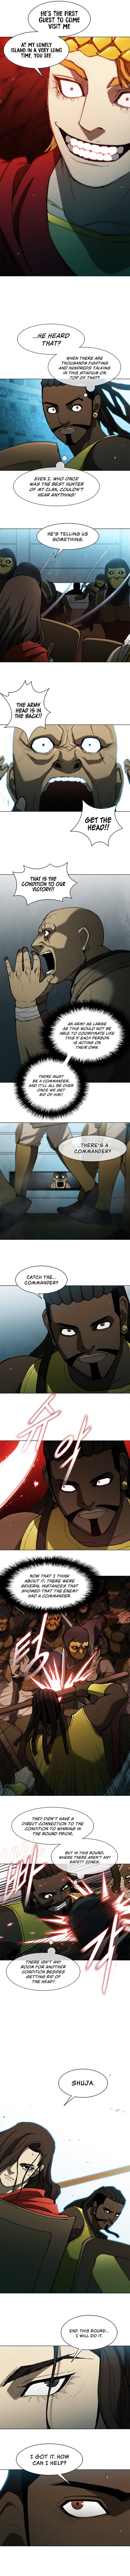 Long Way of the Warrior - Chapter 105 Page 5